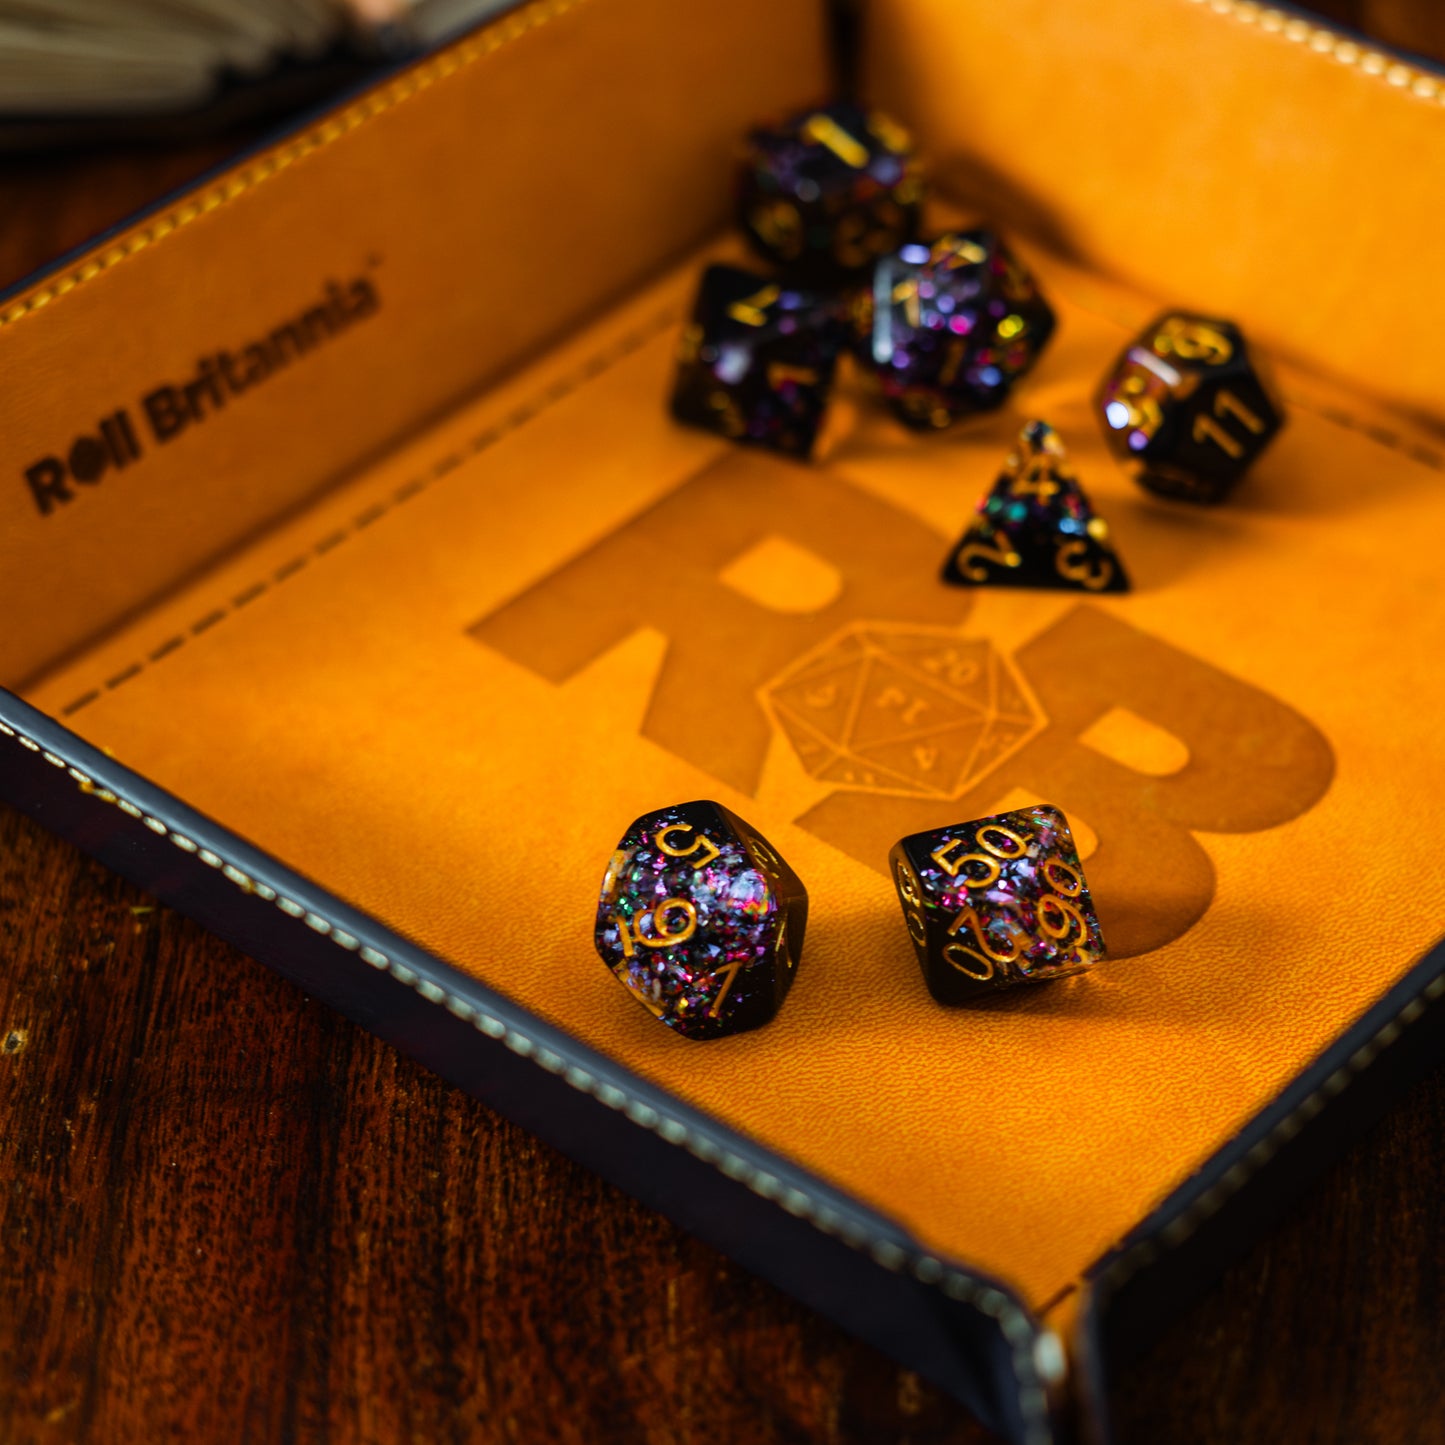 Roll Britannia Derek Normalbeard Dungeons and Dragons Dice Set in branded leather dice tray